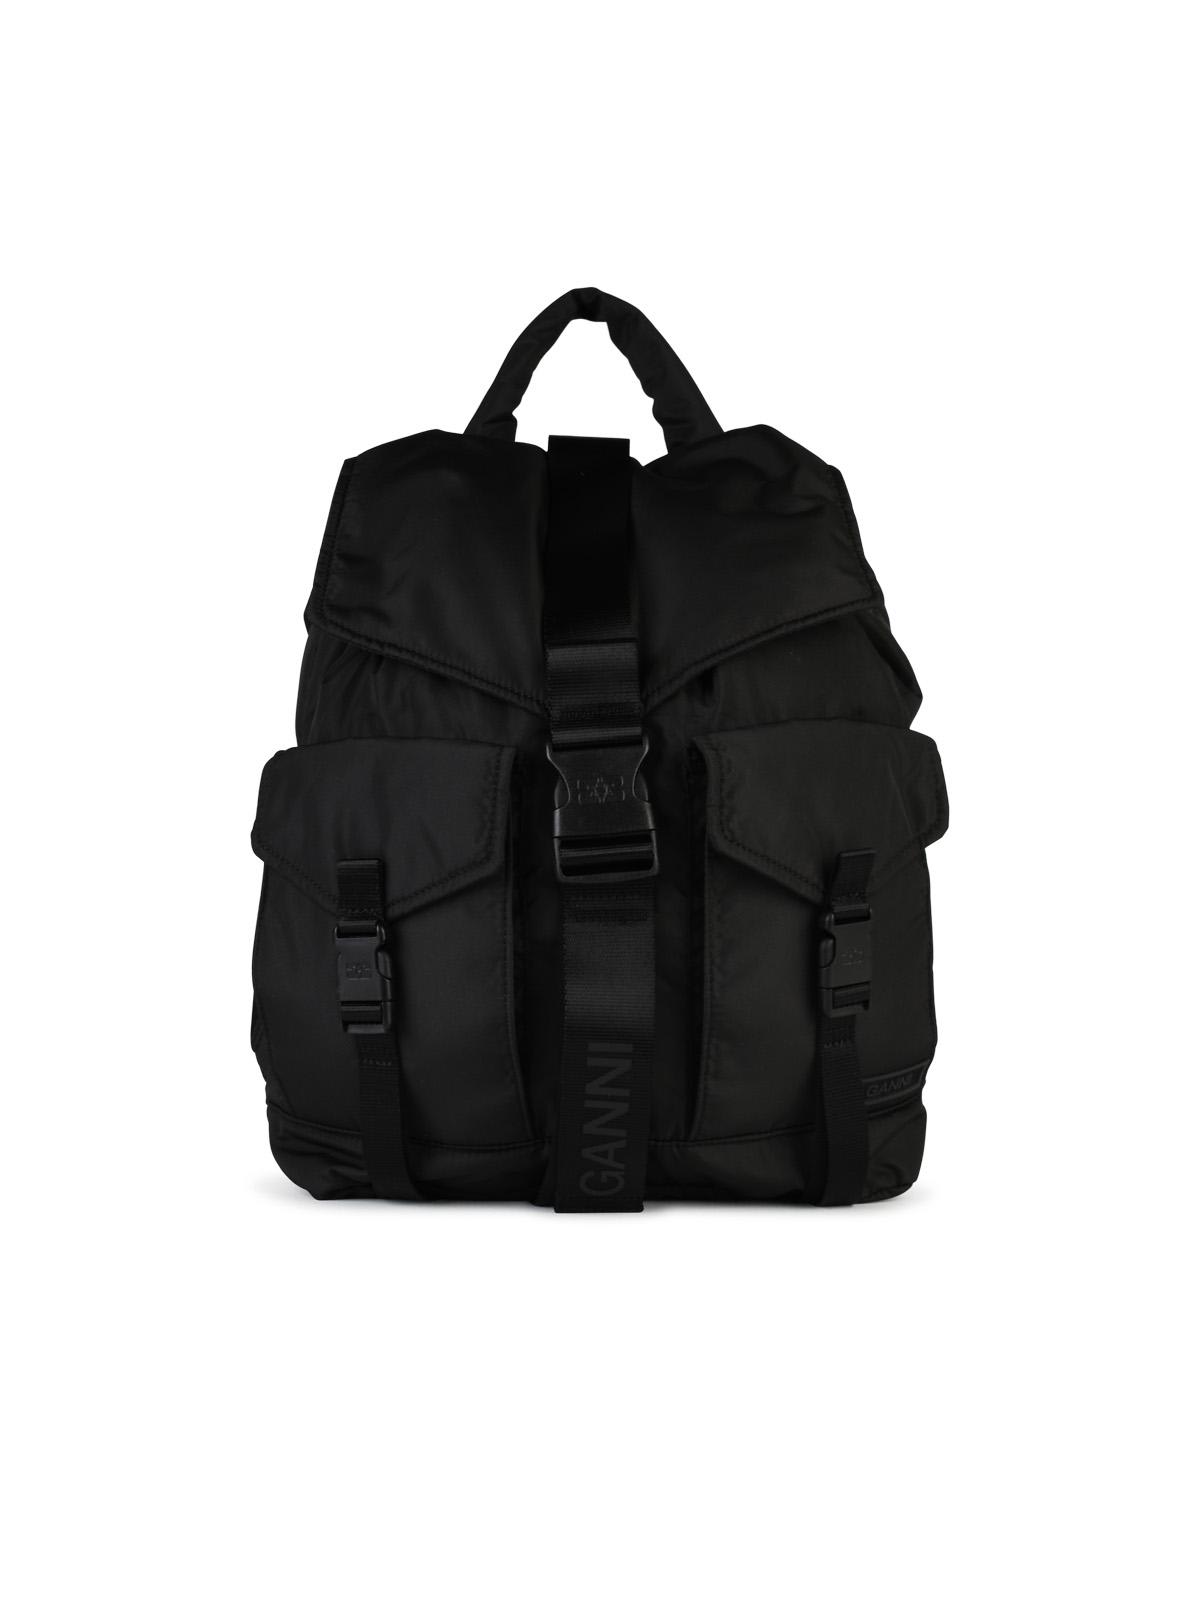 Ganni Black Recycled Polyester Backpack